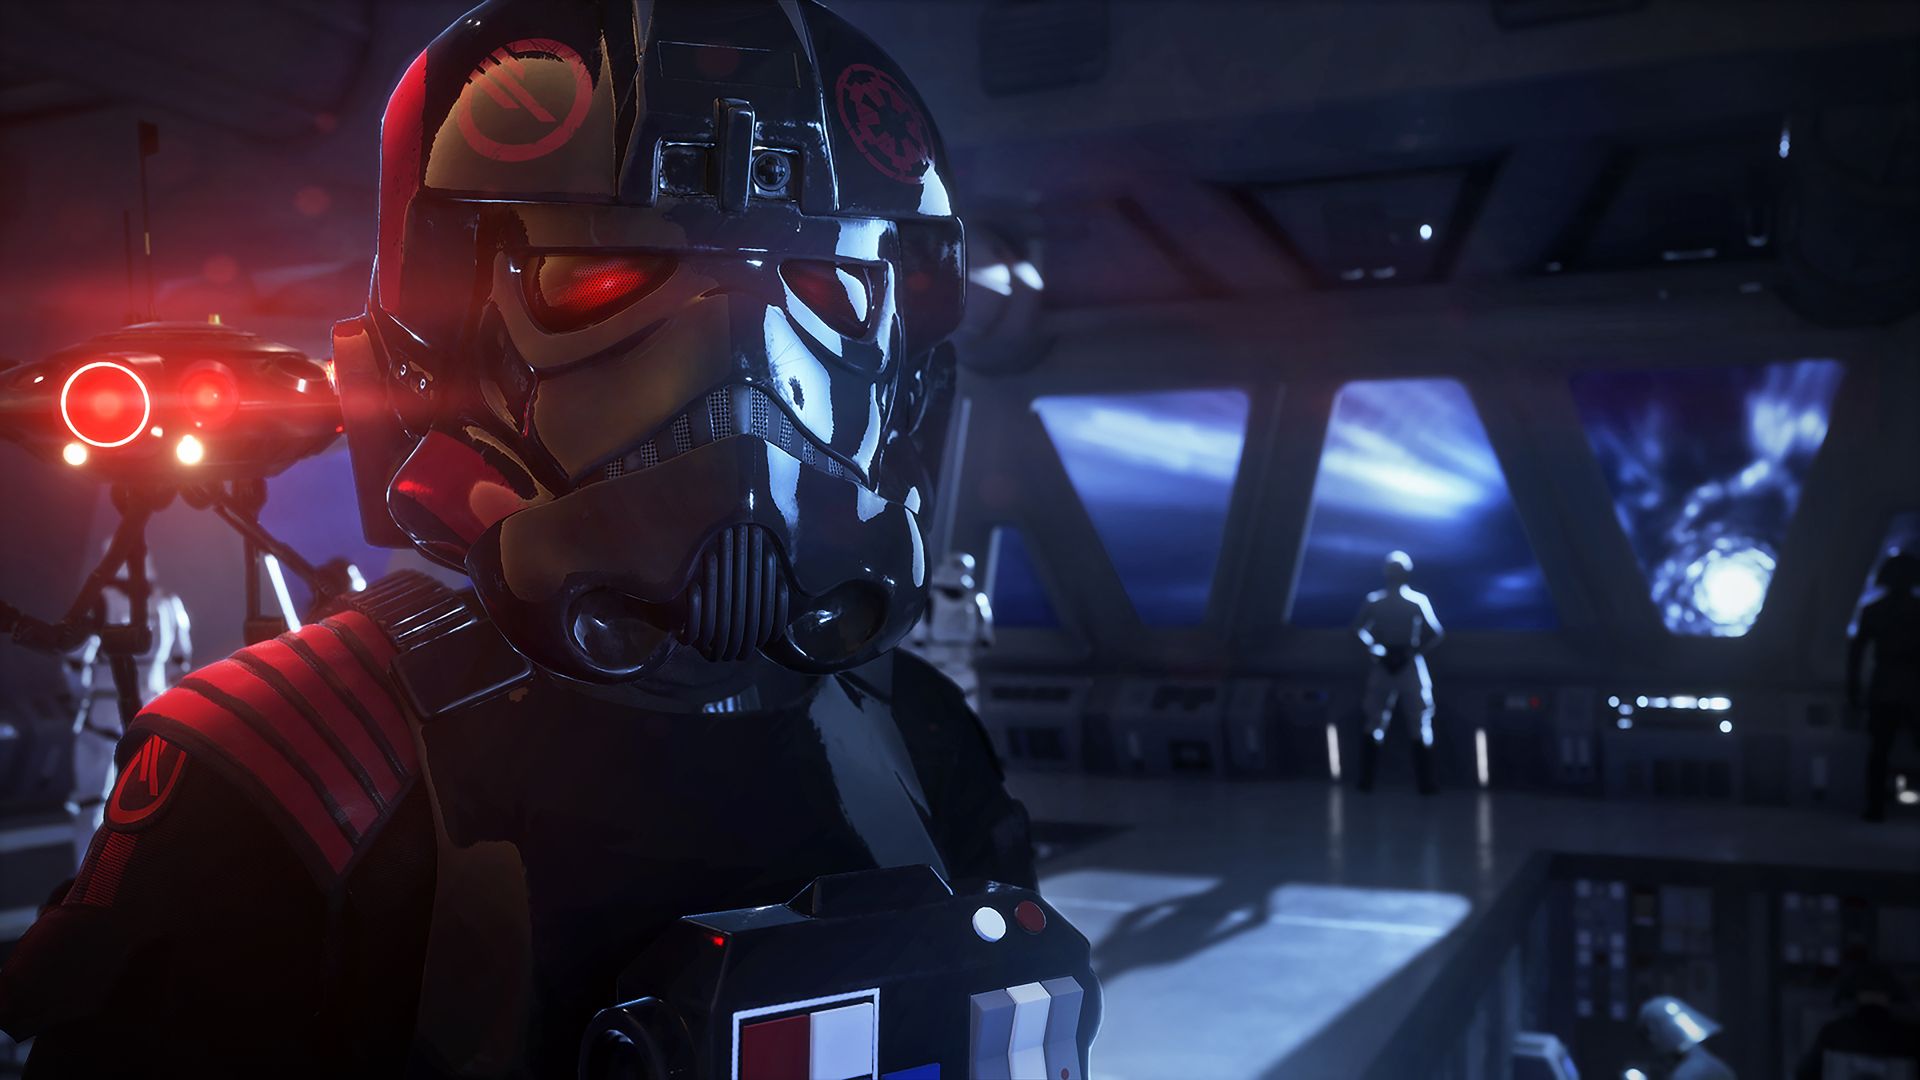 Image for Microtransactions in Star Wars Battlefront 2 suspended due to pressure from Disney - report